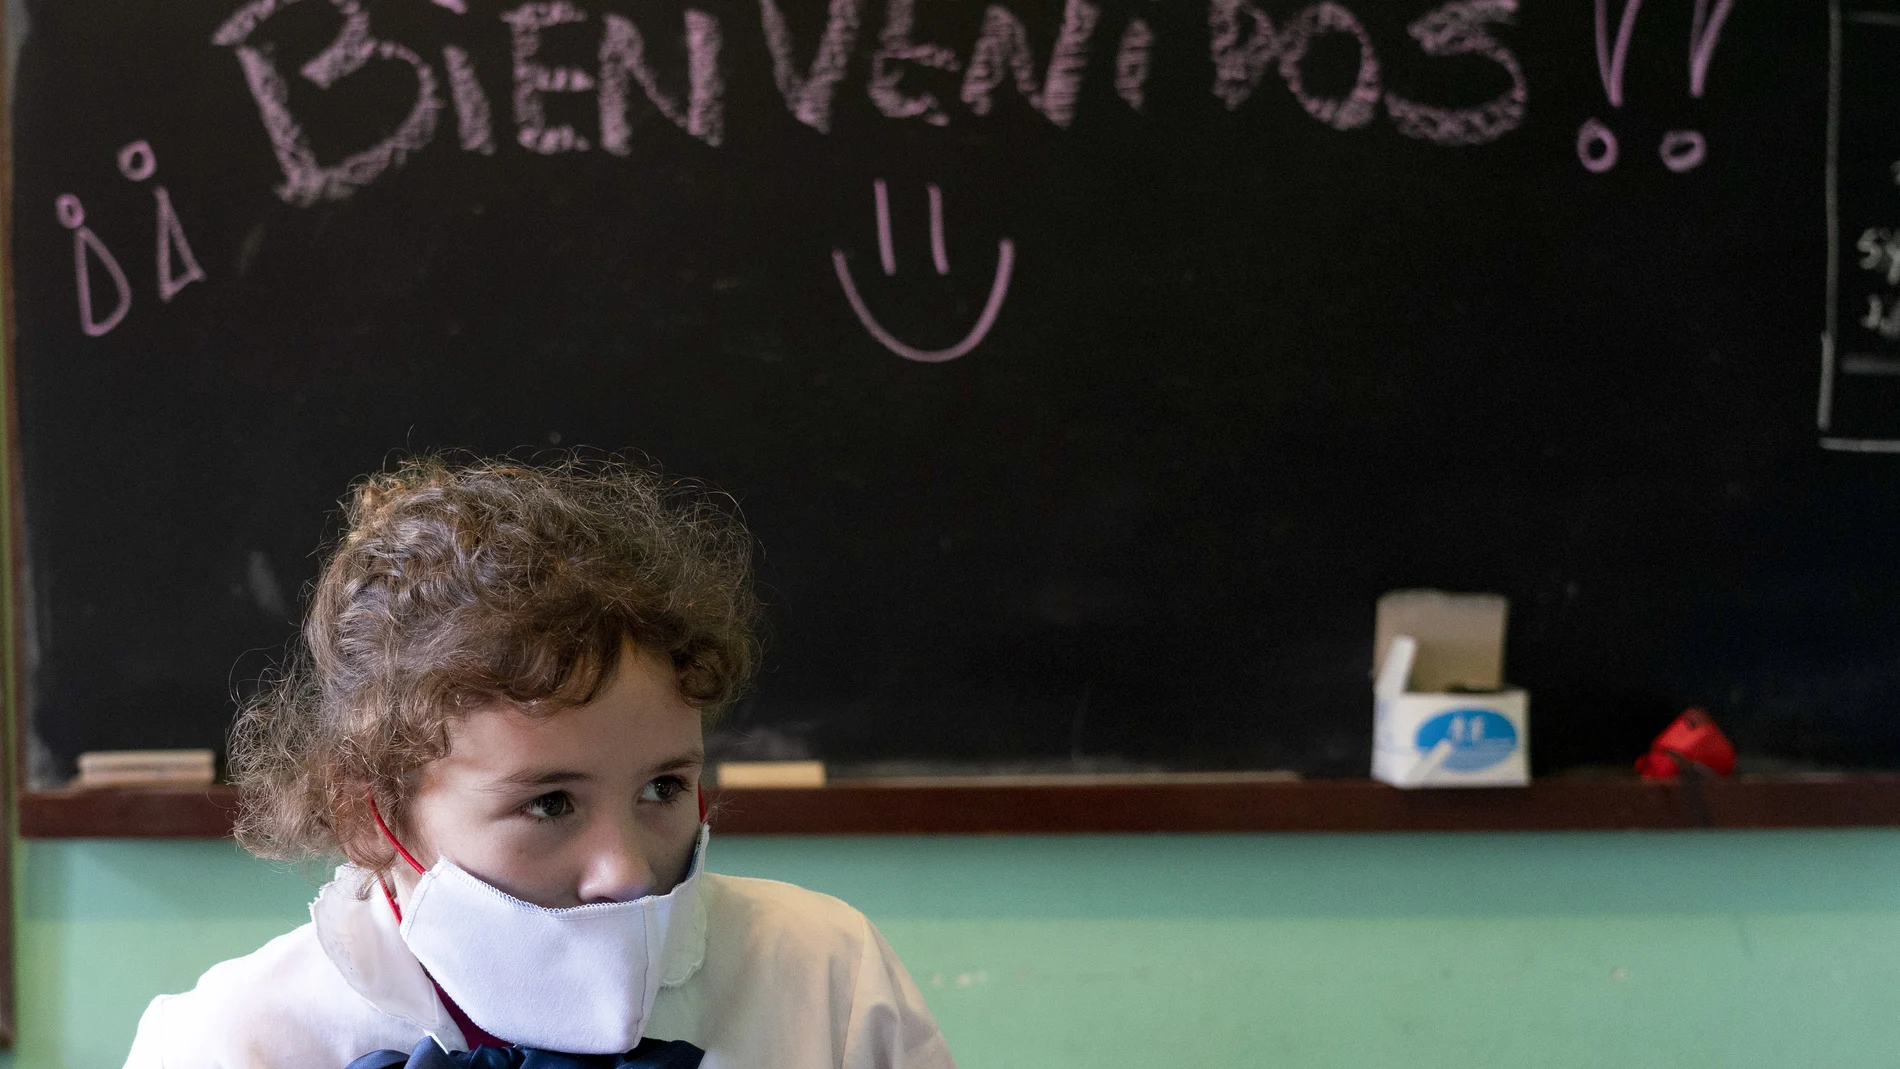 A girl wearing a face mask amid the new coronavirus pandemic attends class where the chalkboard reads in Spanish "Welcome!" at a rural school near Empalme Olmos, Uruguay, Monday, June 1, 2020. Some children returned to school Monday in some areas as Uruguay's total lockdown begins to ease. (AP Photo/Matilde Campodonico)